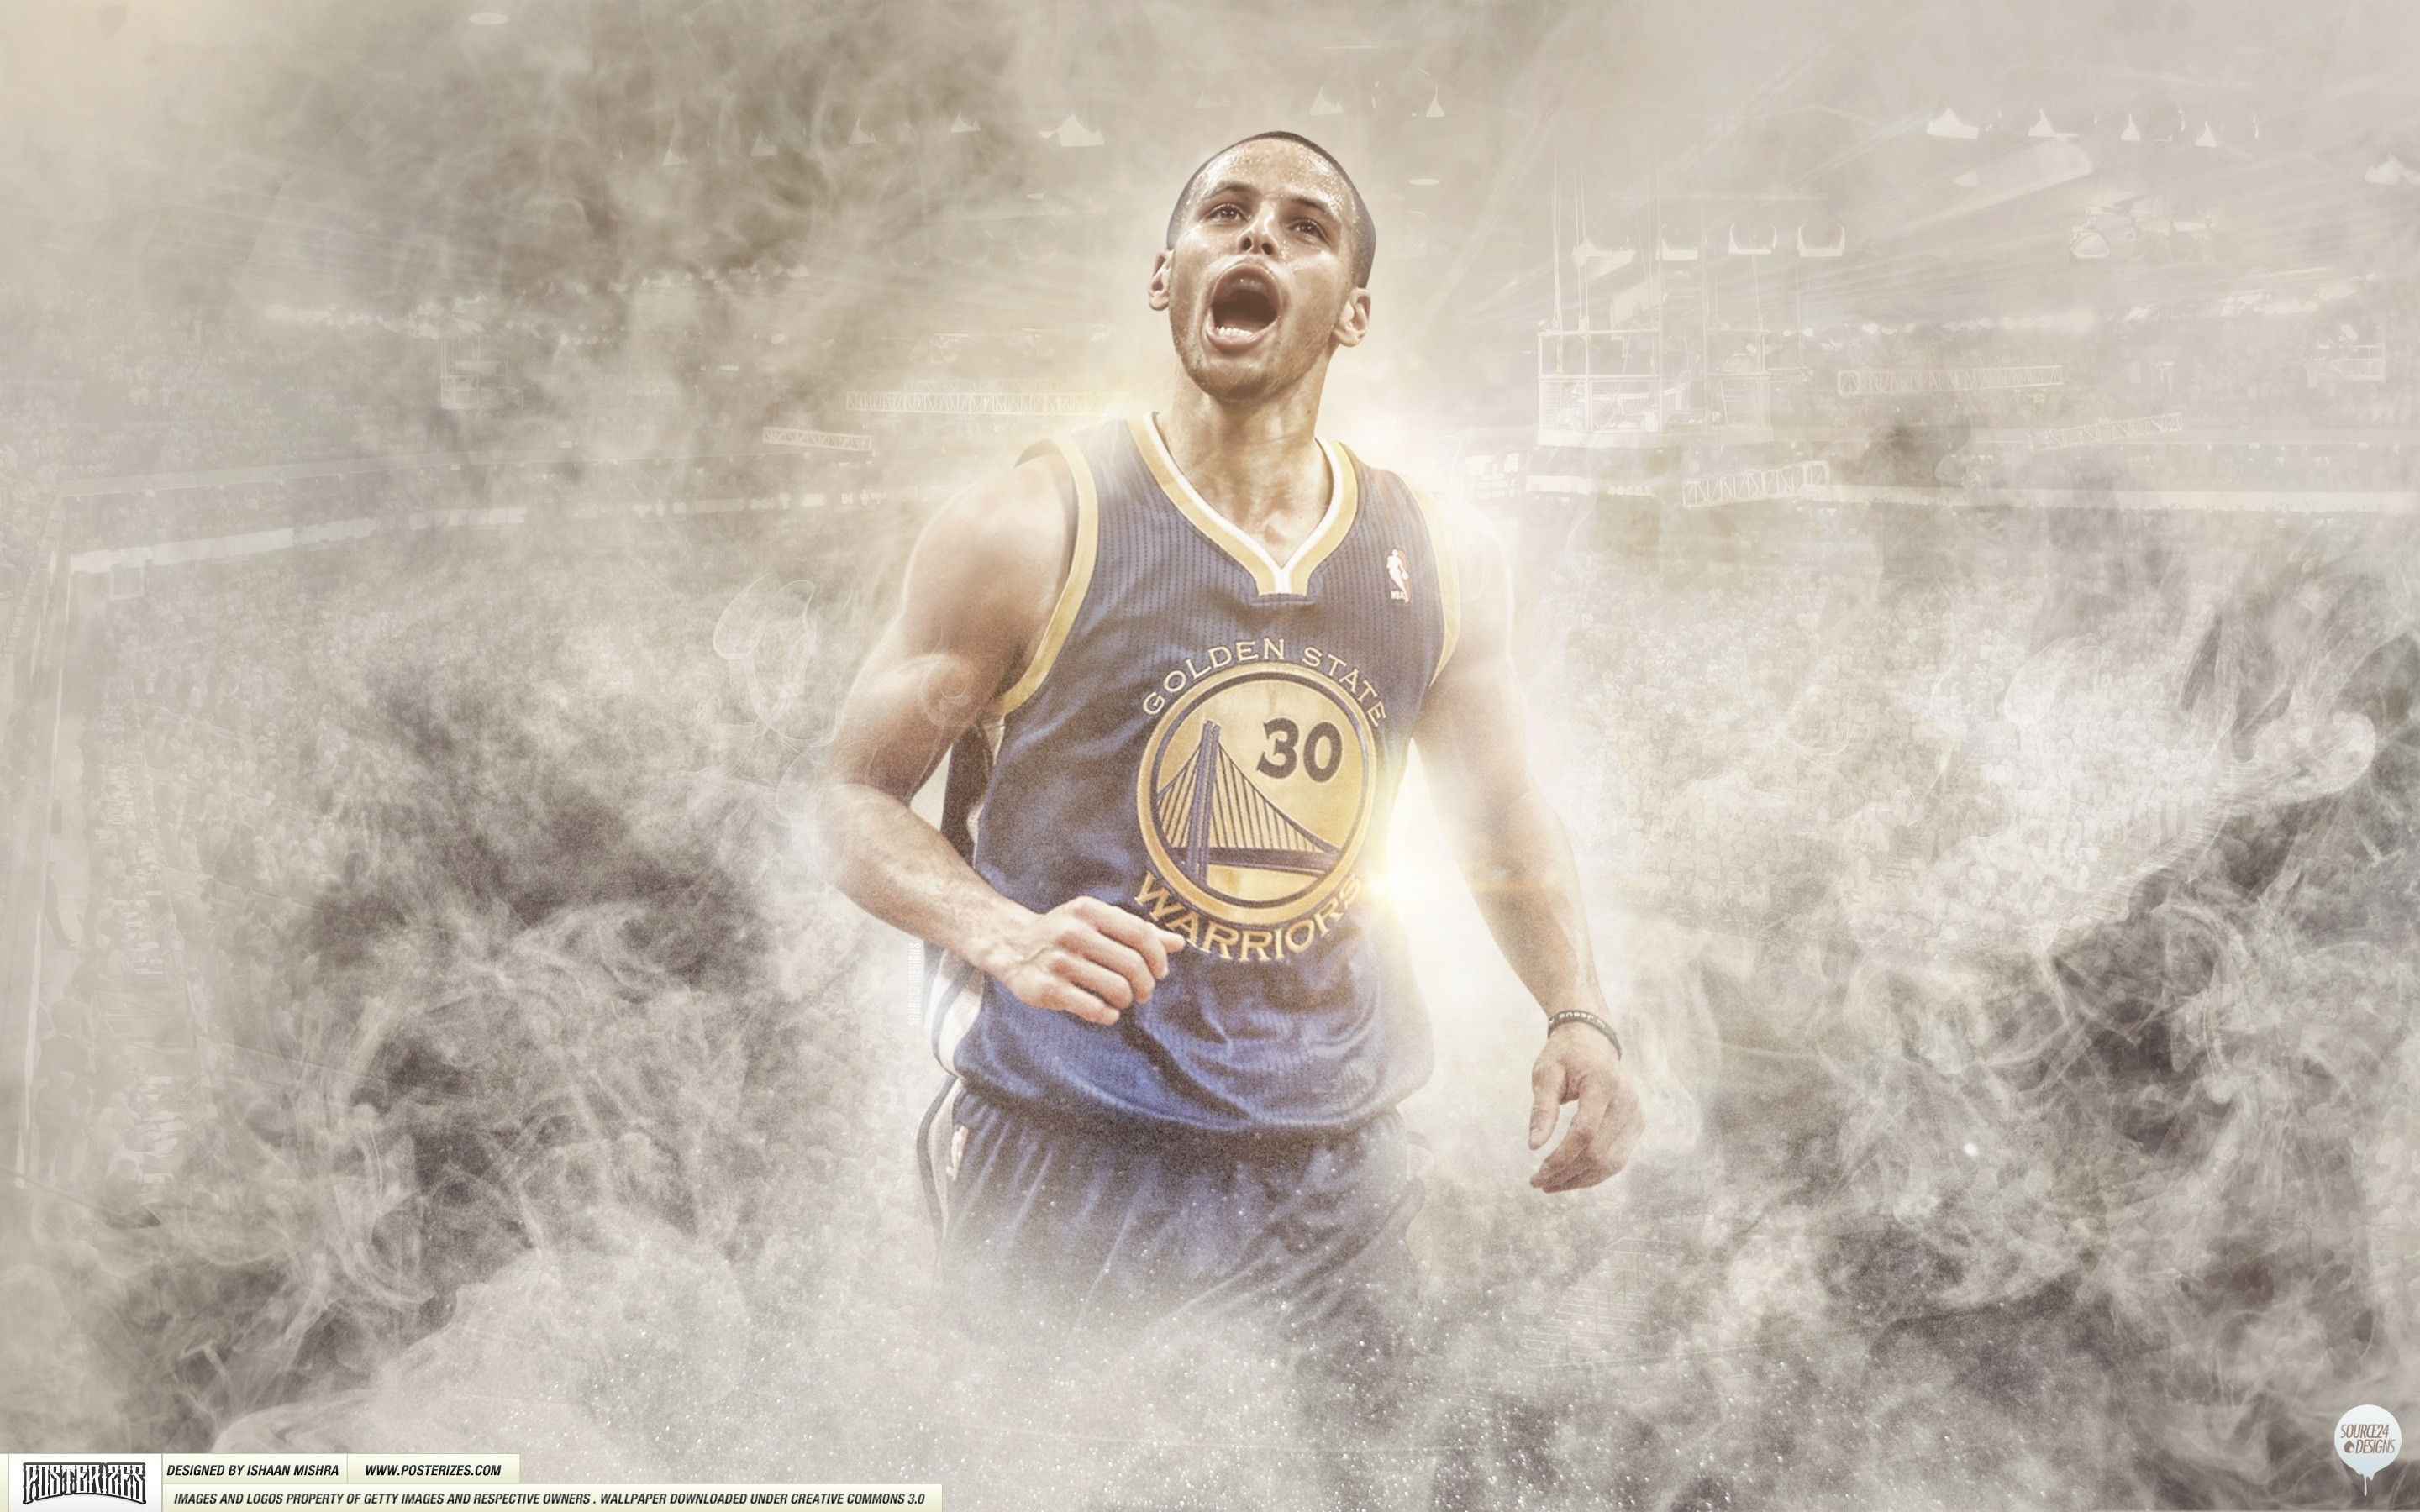 2880x1800 Steph Curry Wallpaper by IshaanMishra Steph Curry Wallpaper by IshaanMishra